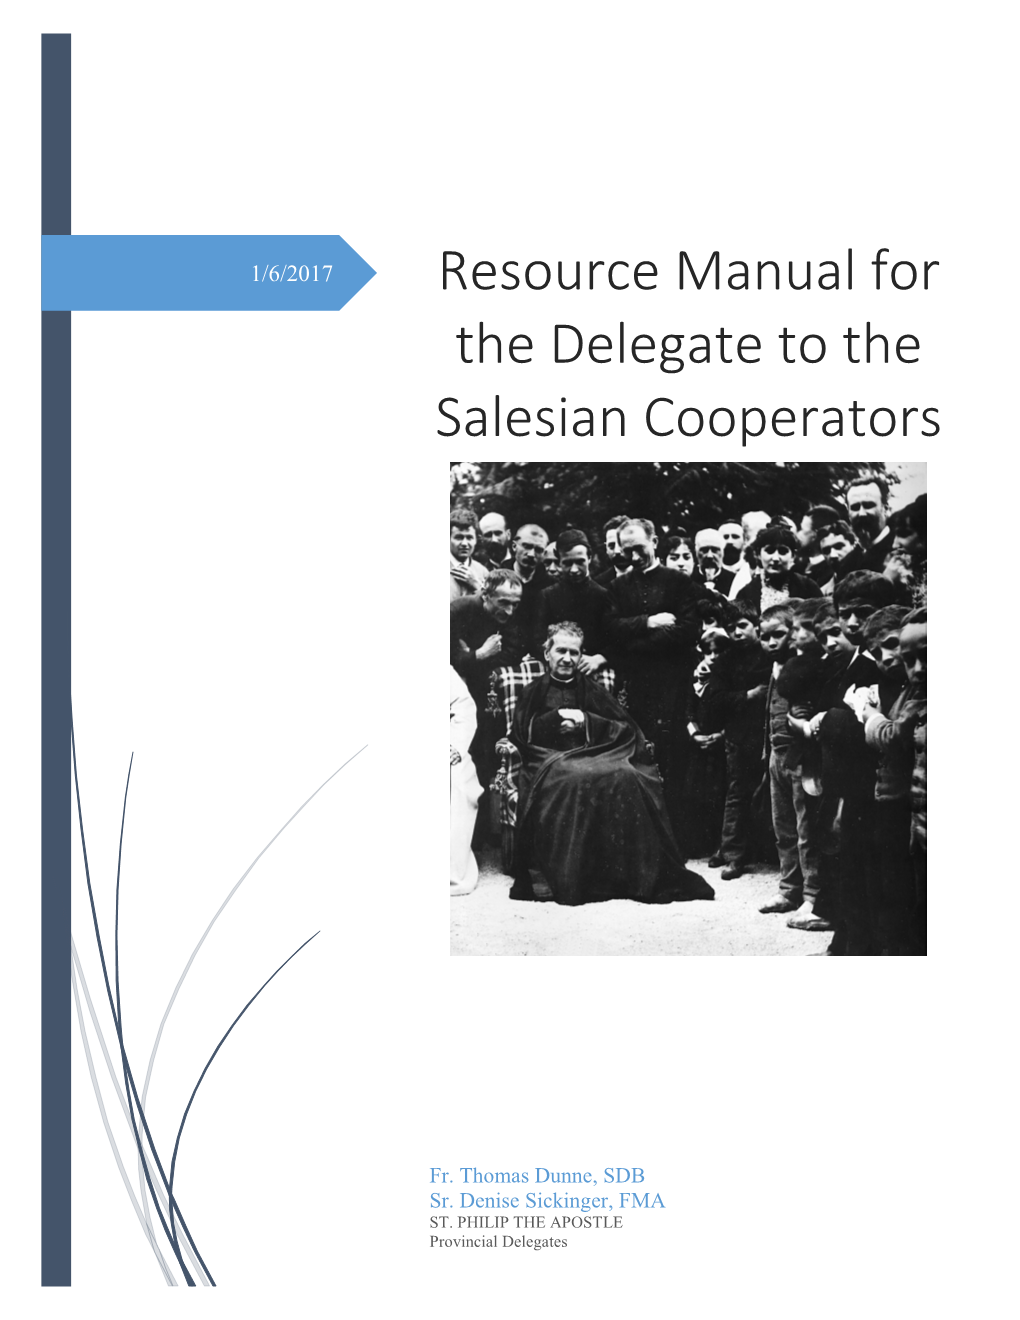 Resource Manual for the Delegate to the Salesian Cooperators